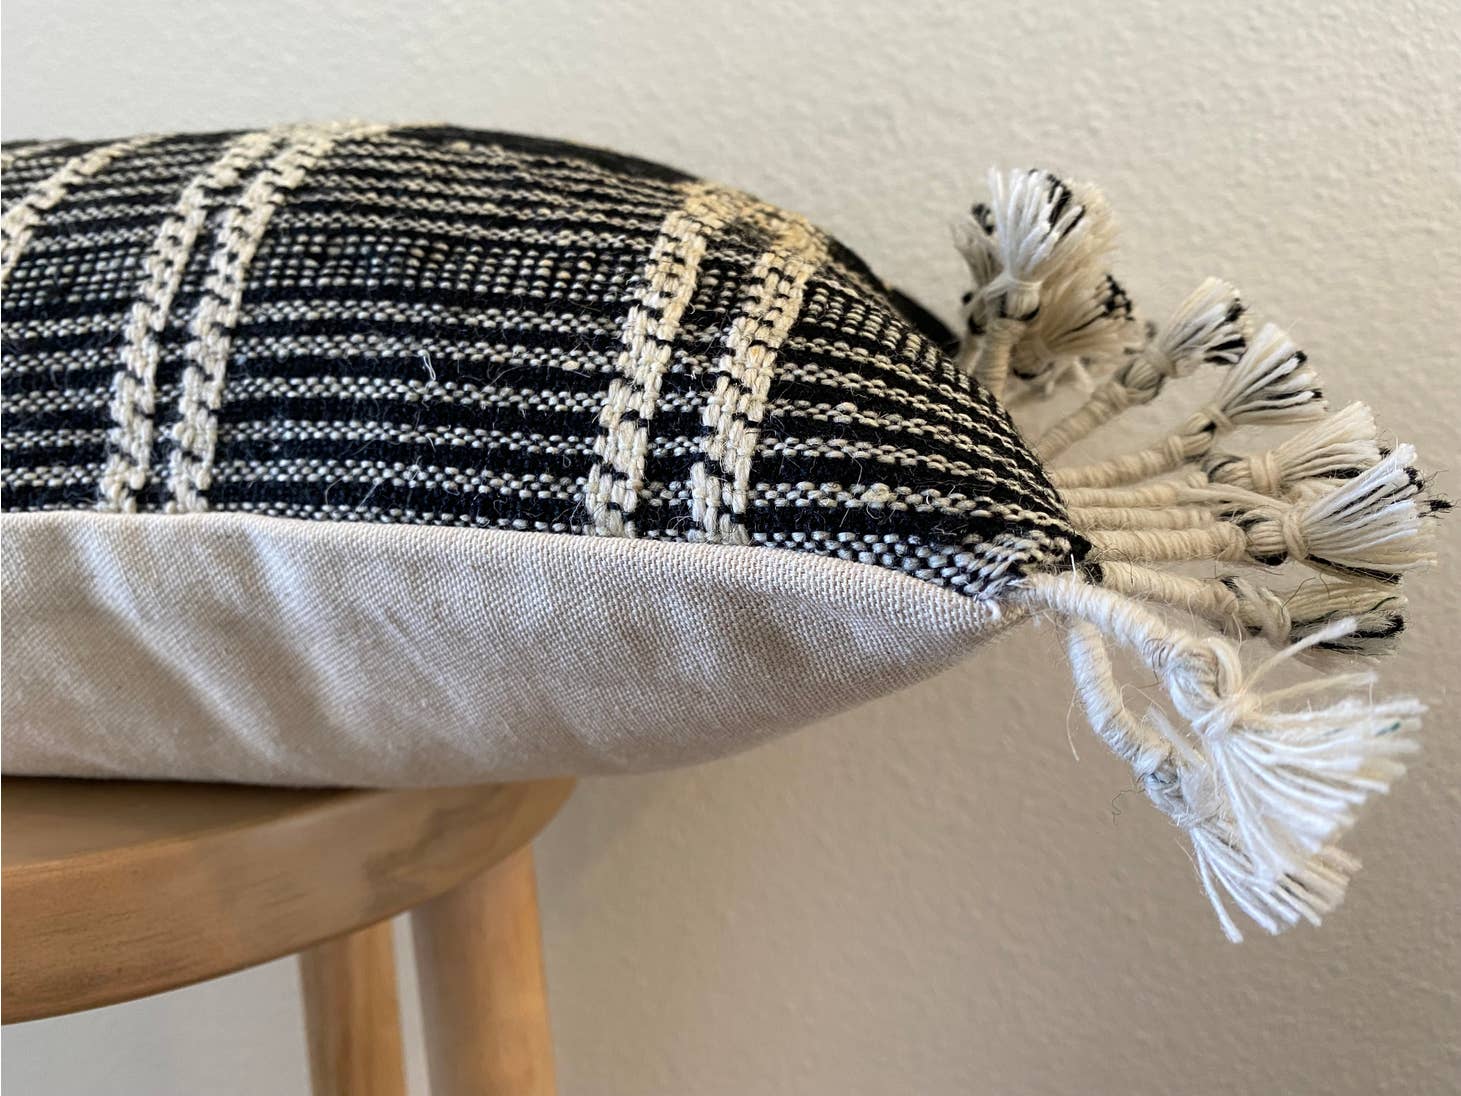 Gia 12" x 20" lumbar pillow designed in California and hand woven in India.